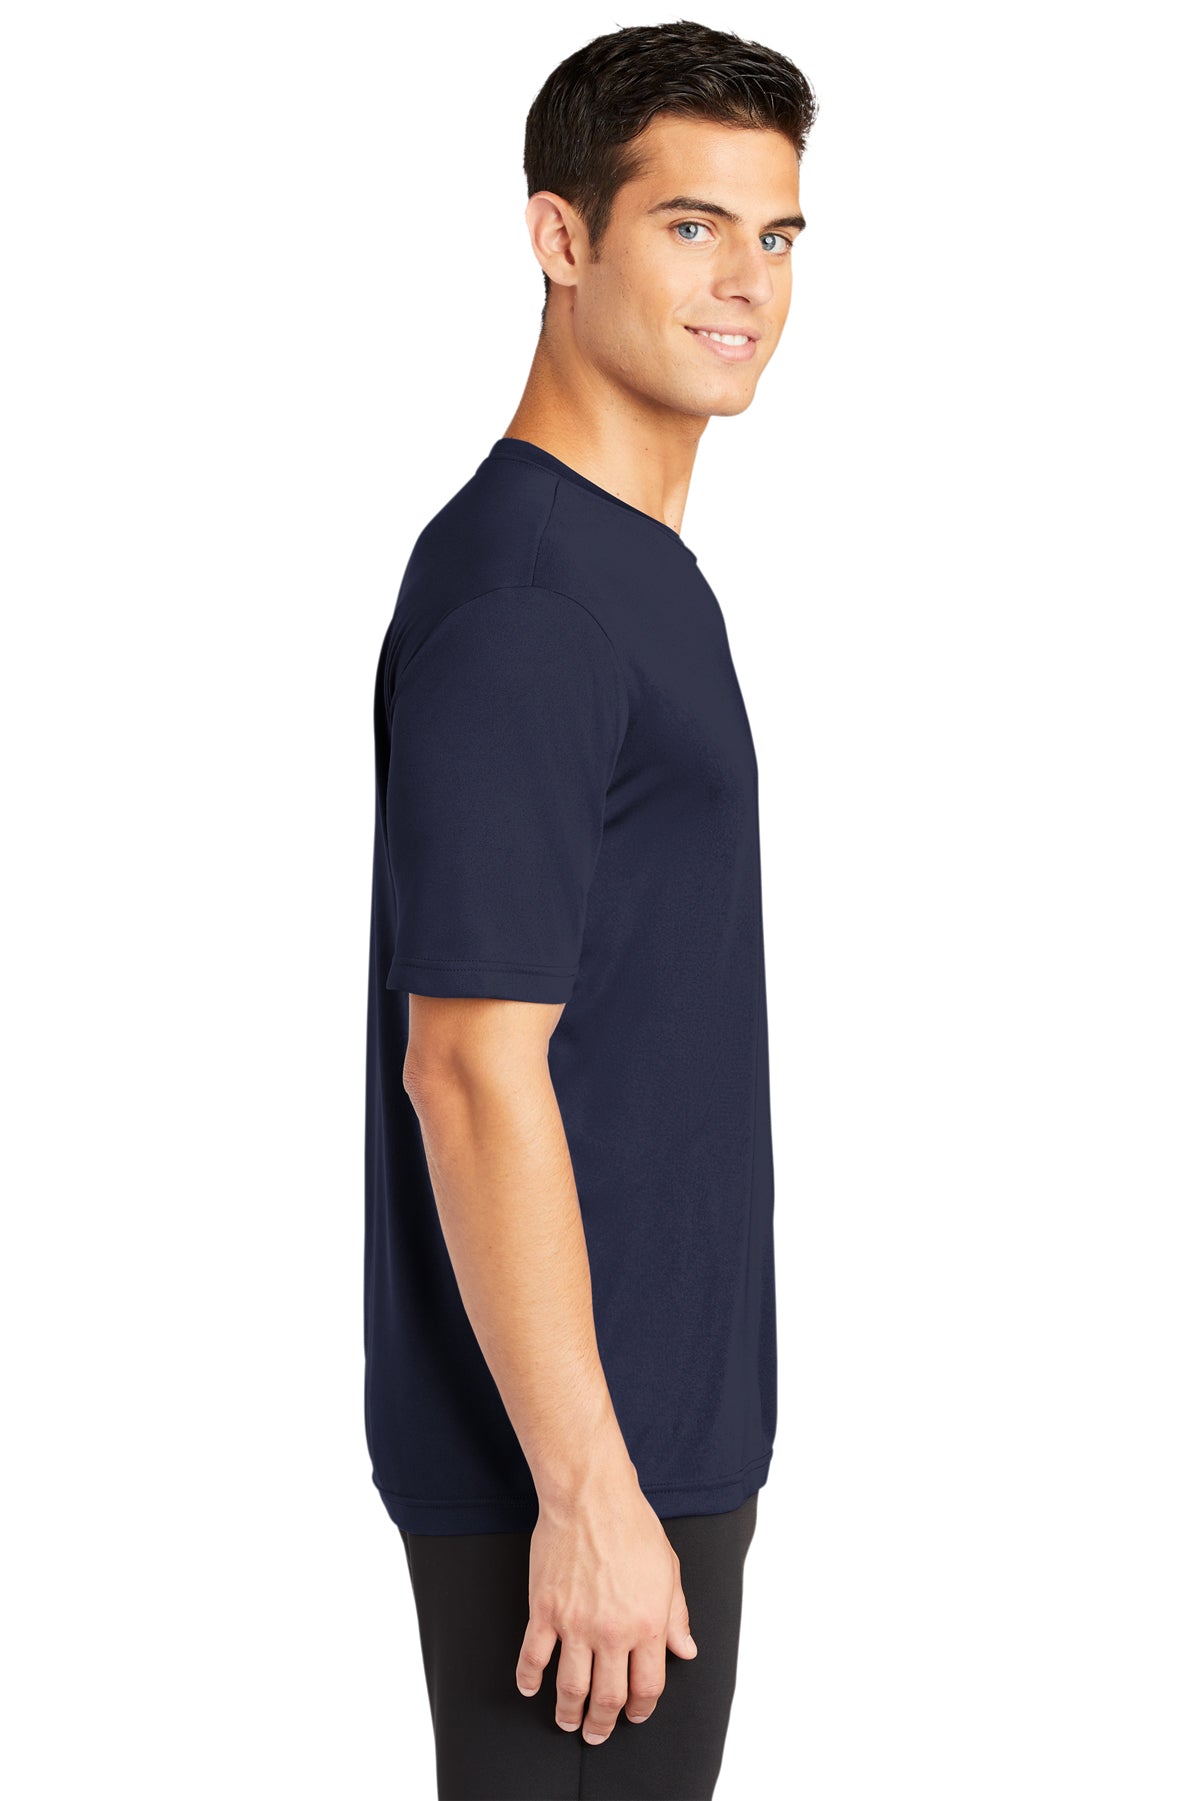 Sport-Tek Tall PosiCharge Branded Competitor Tee's, True Navy